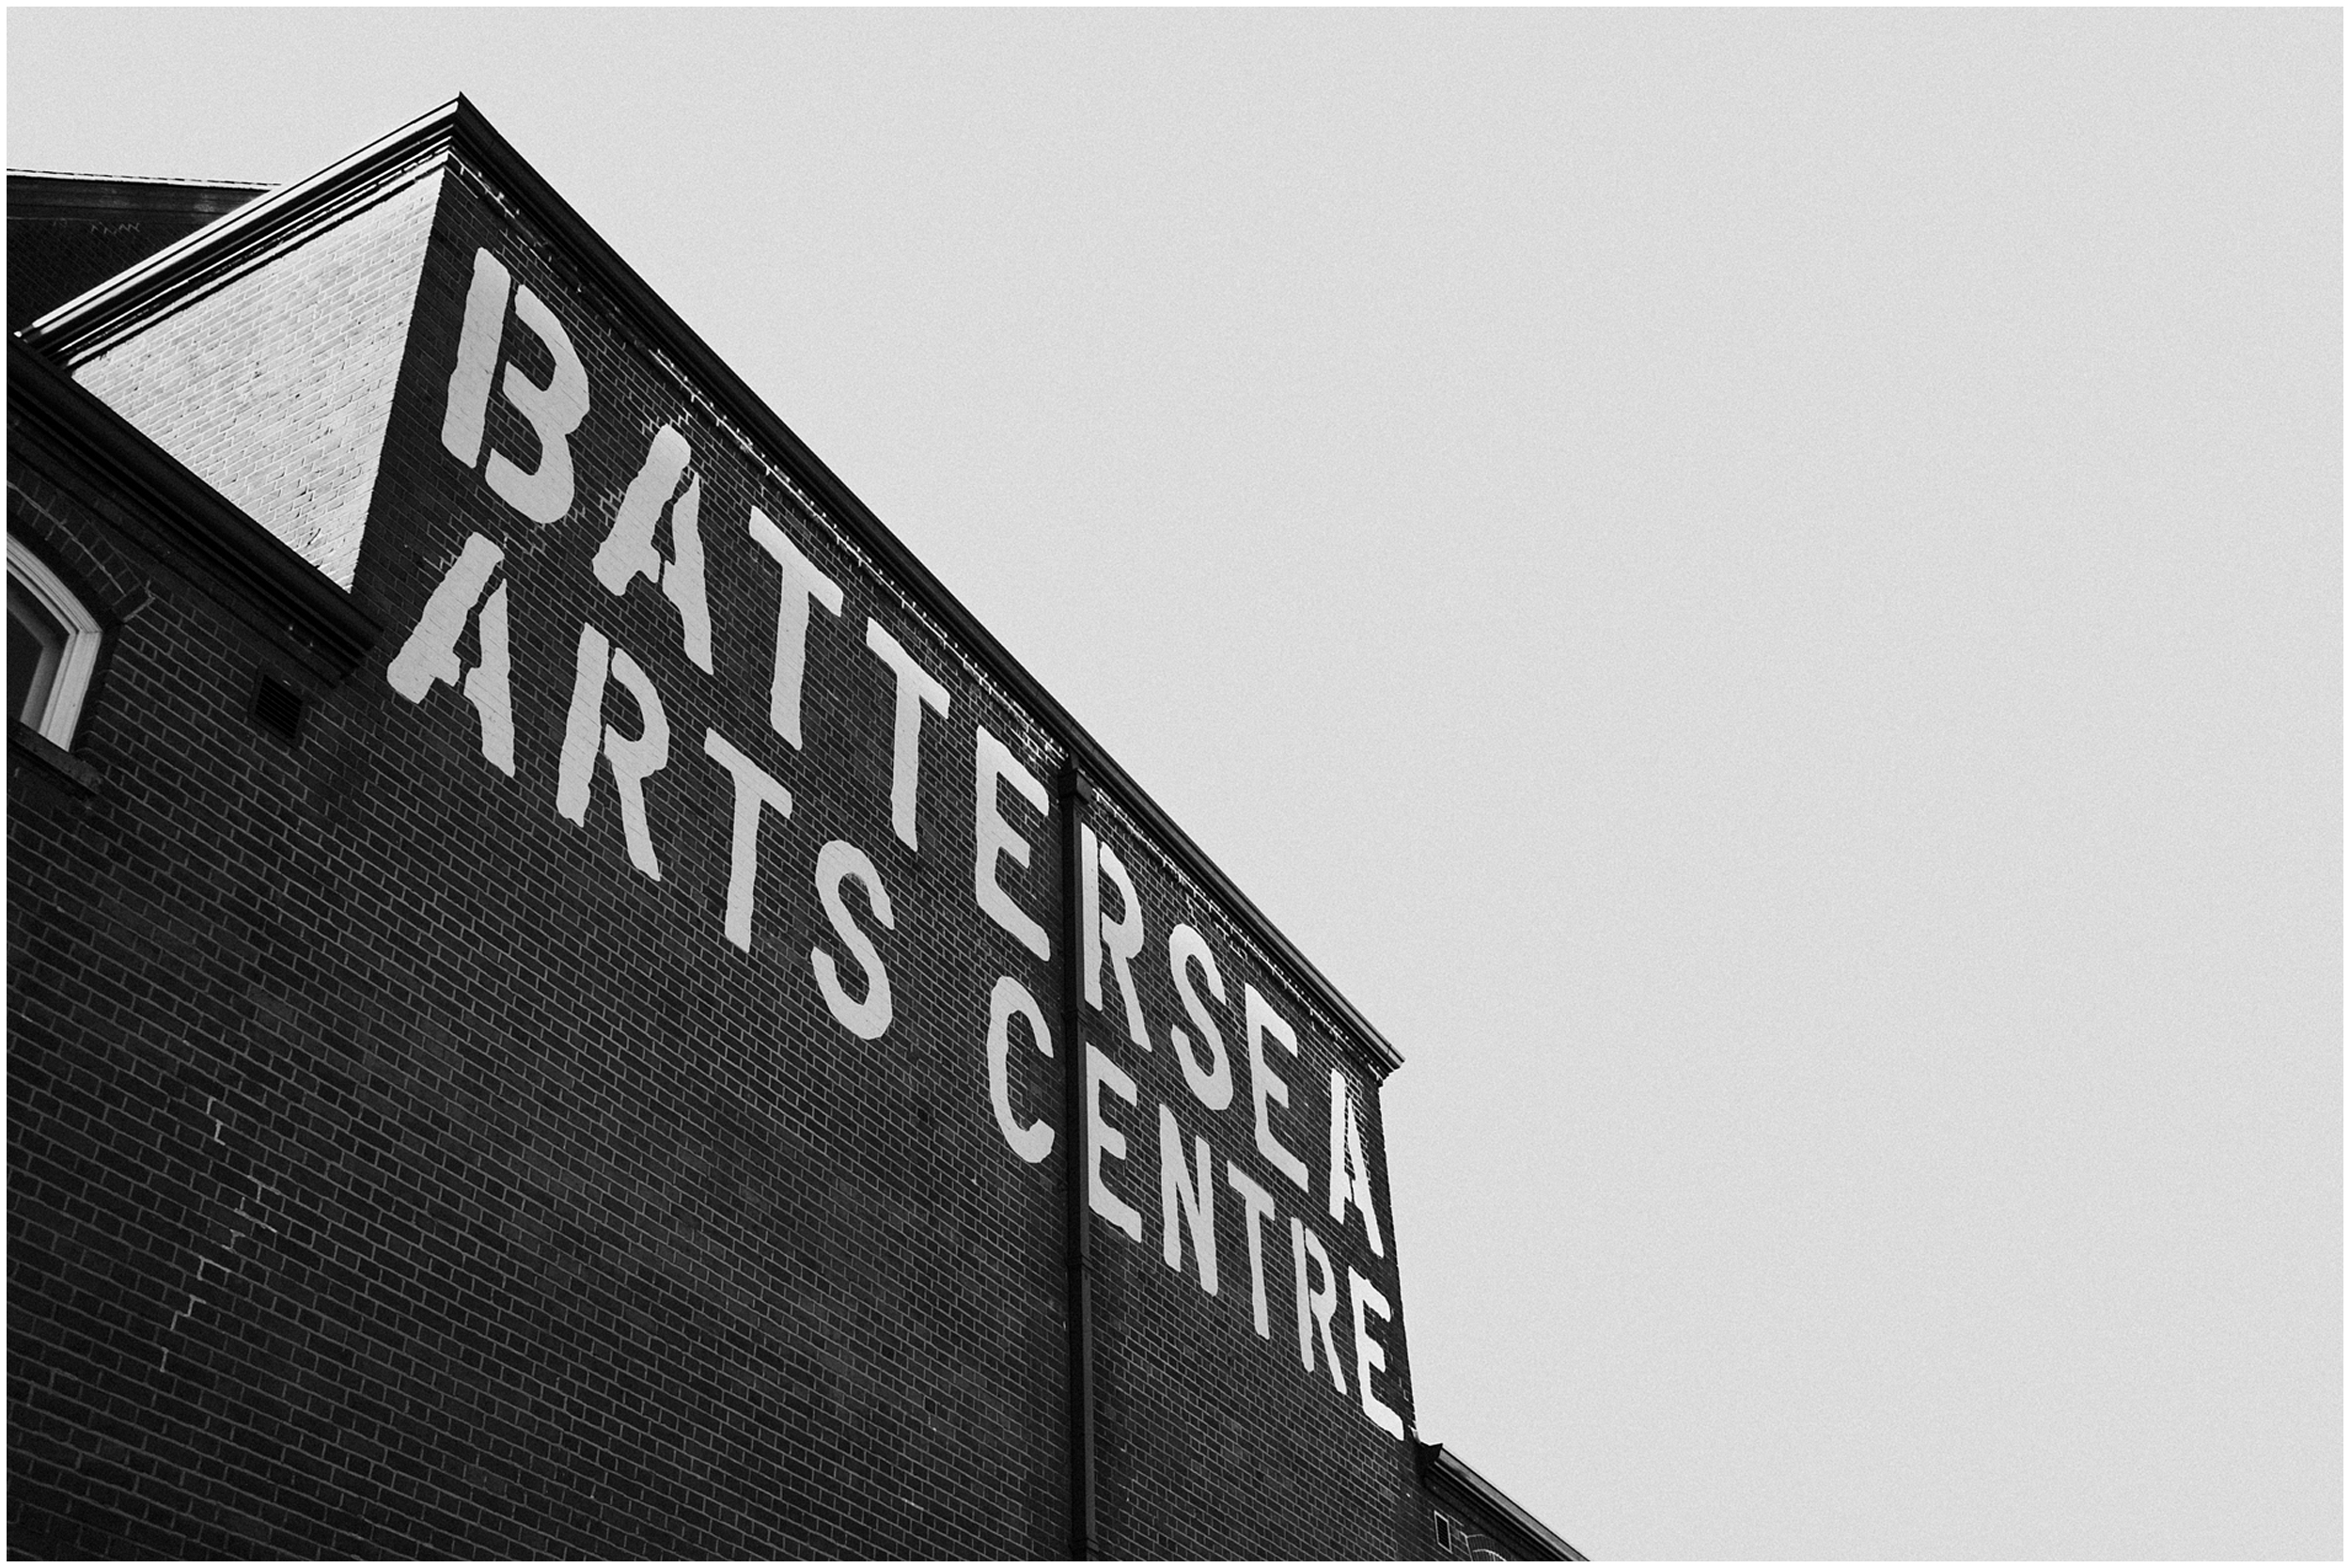 A black and white photo of Battersea Arts Centre